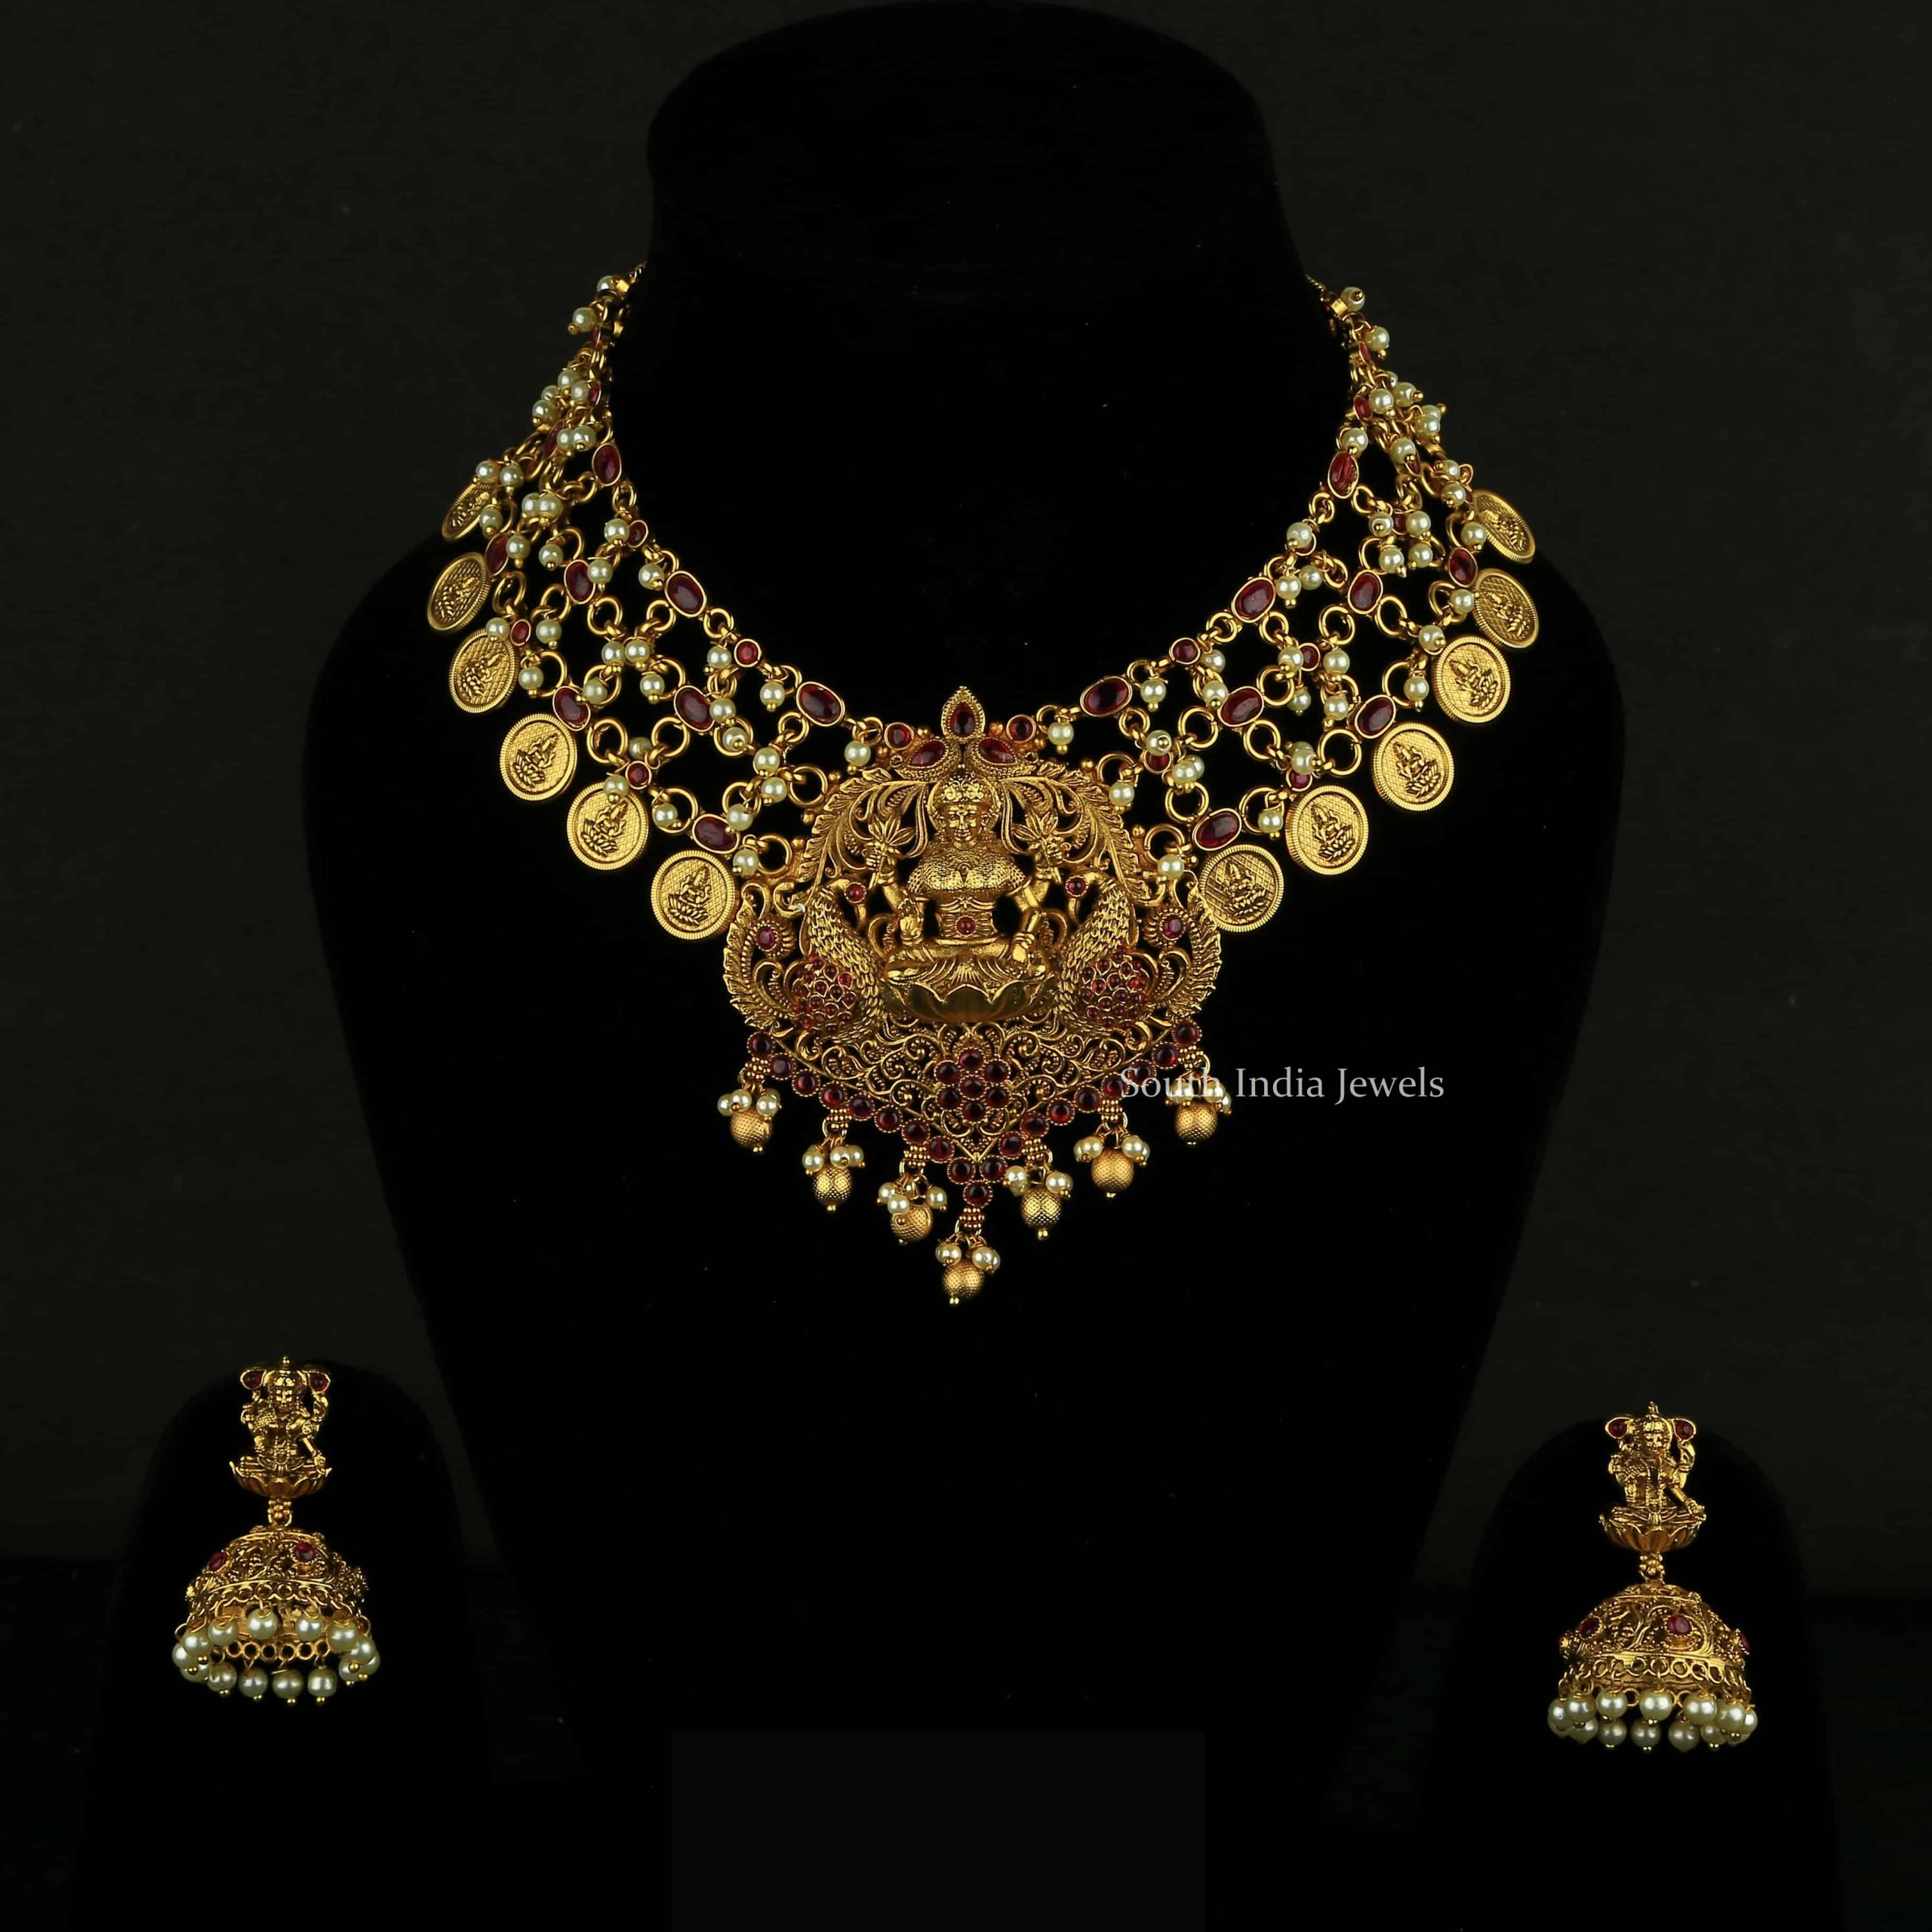 Artificial Bridal Jewellery Online - South India Jewels